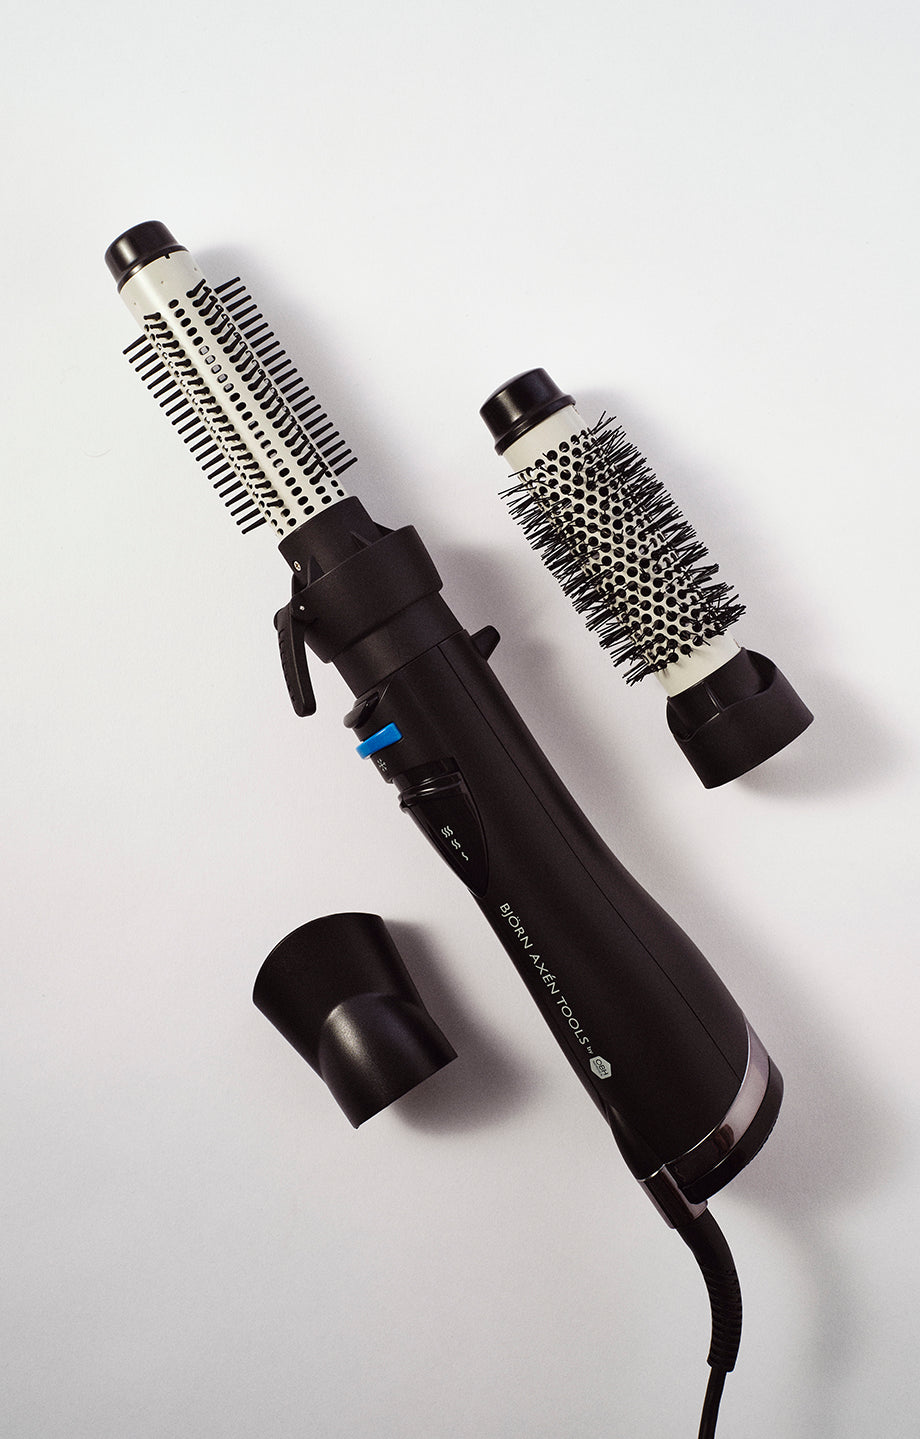 A versatile hot air brush with 2 interchangeable brush heads